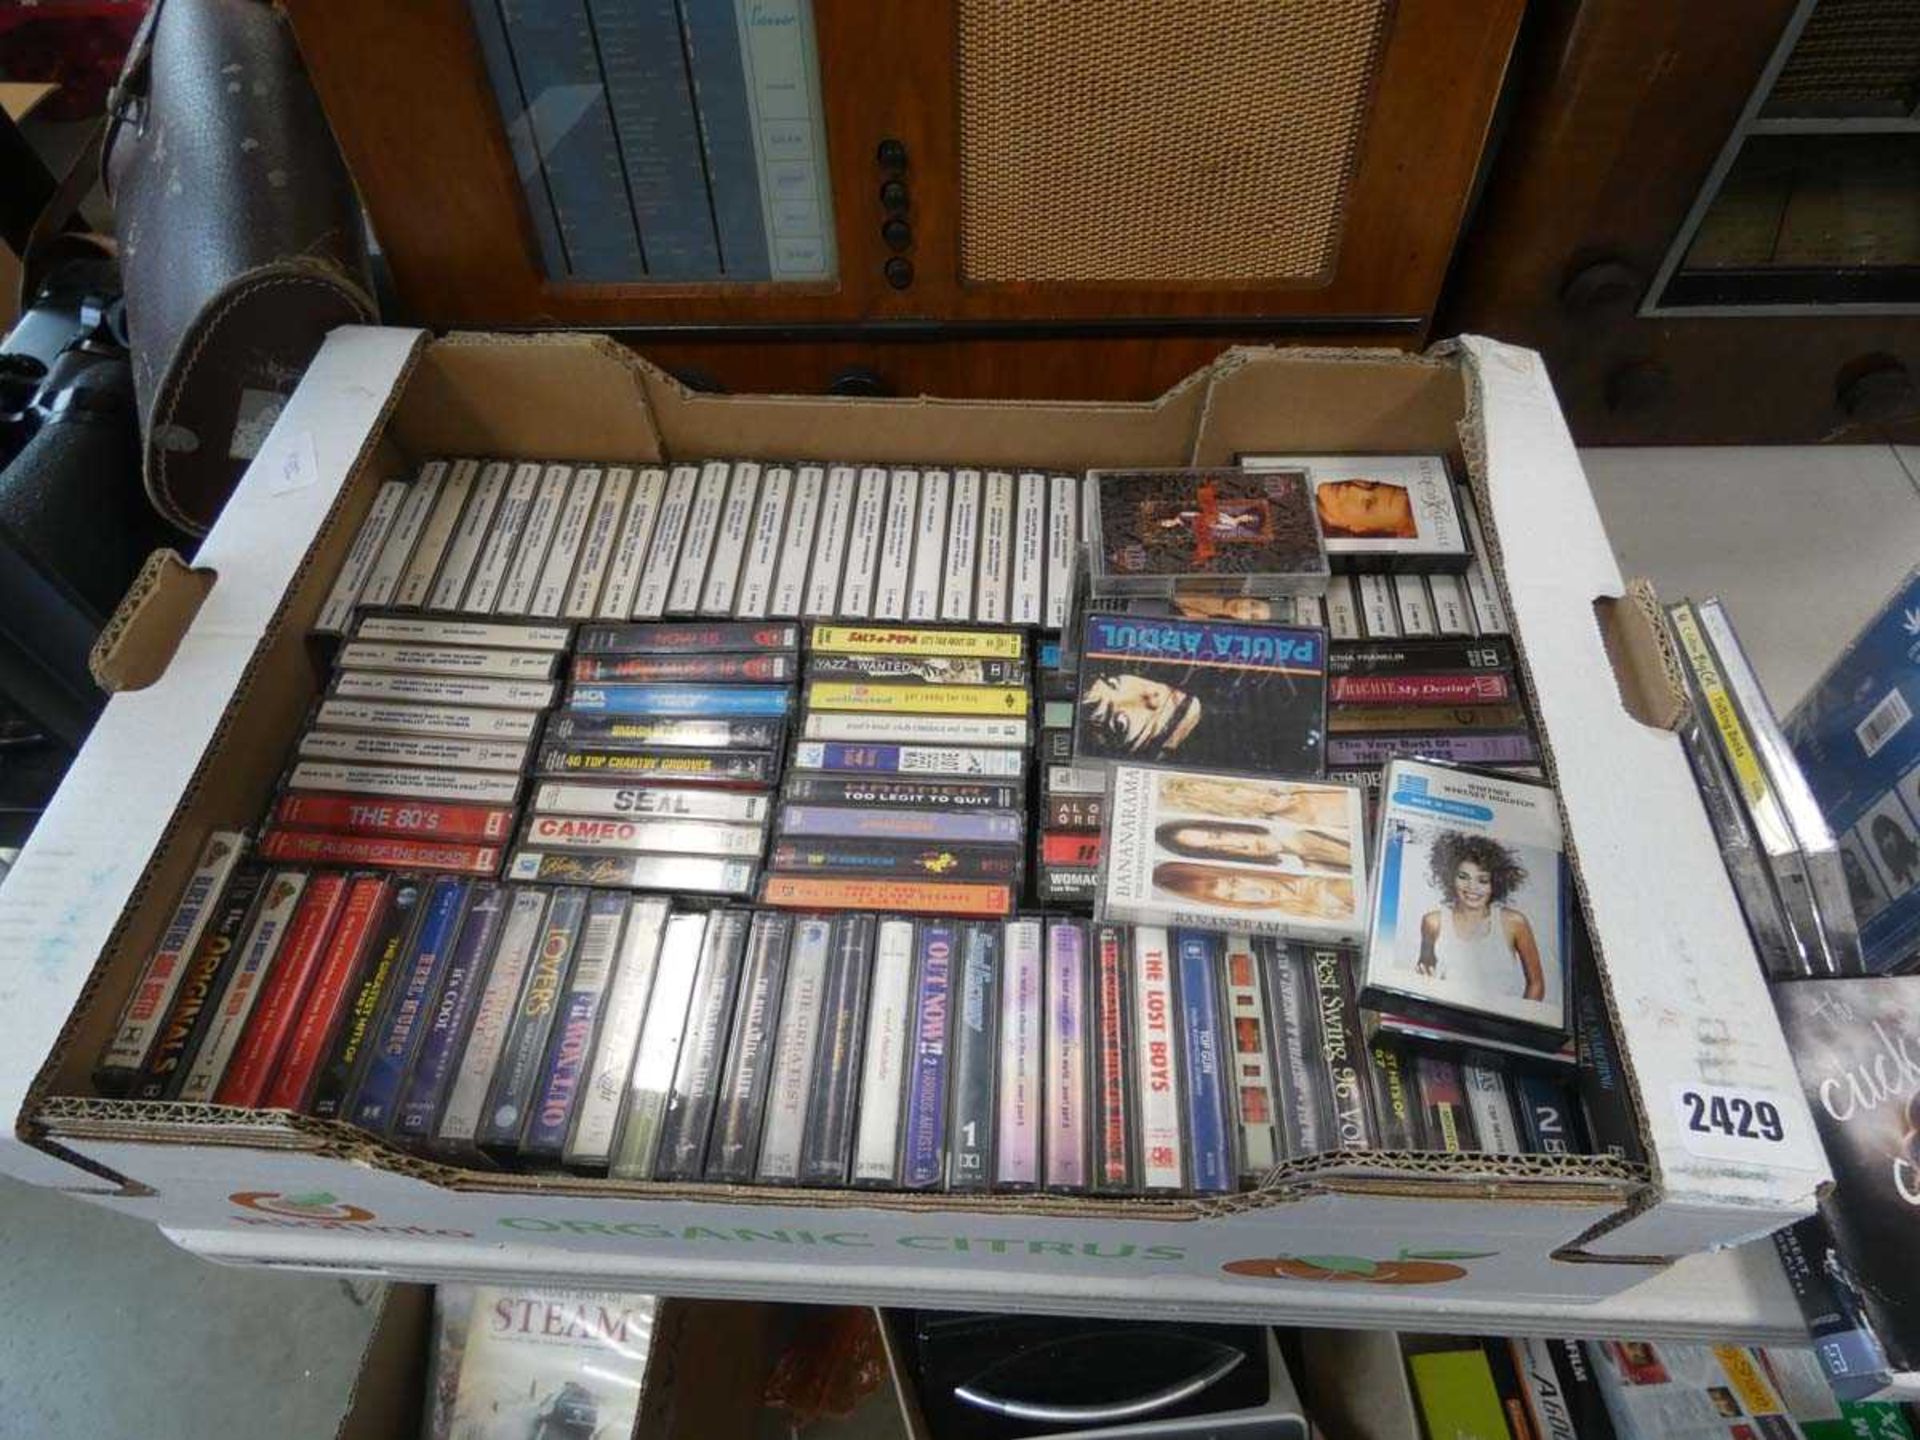 Tray containing a wide selection of cassette tapes by various artists